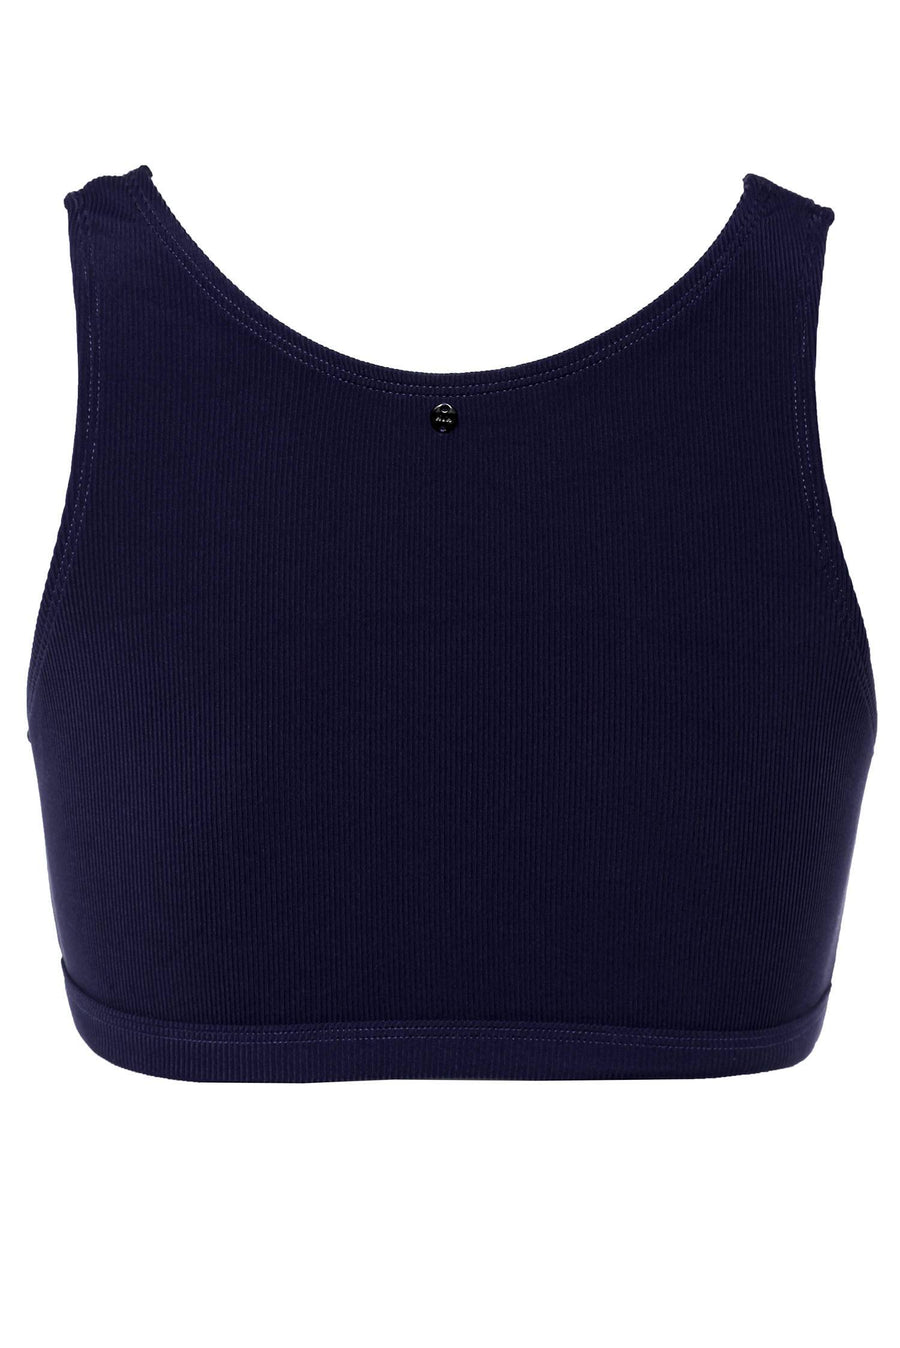 The Valley Top - Ribbed Navy Top